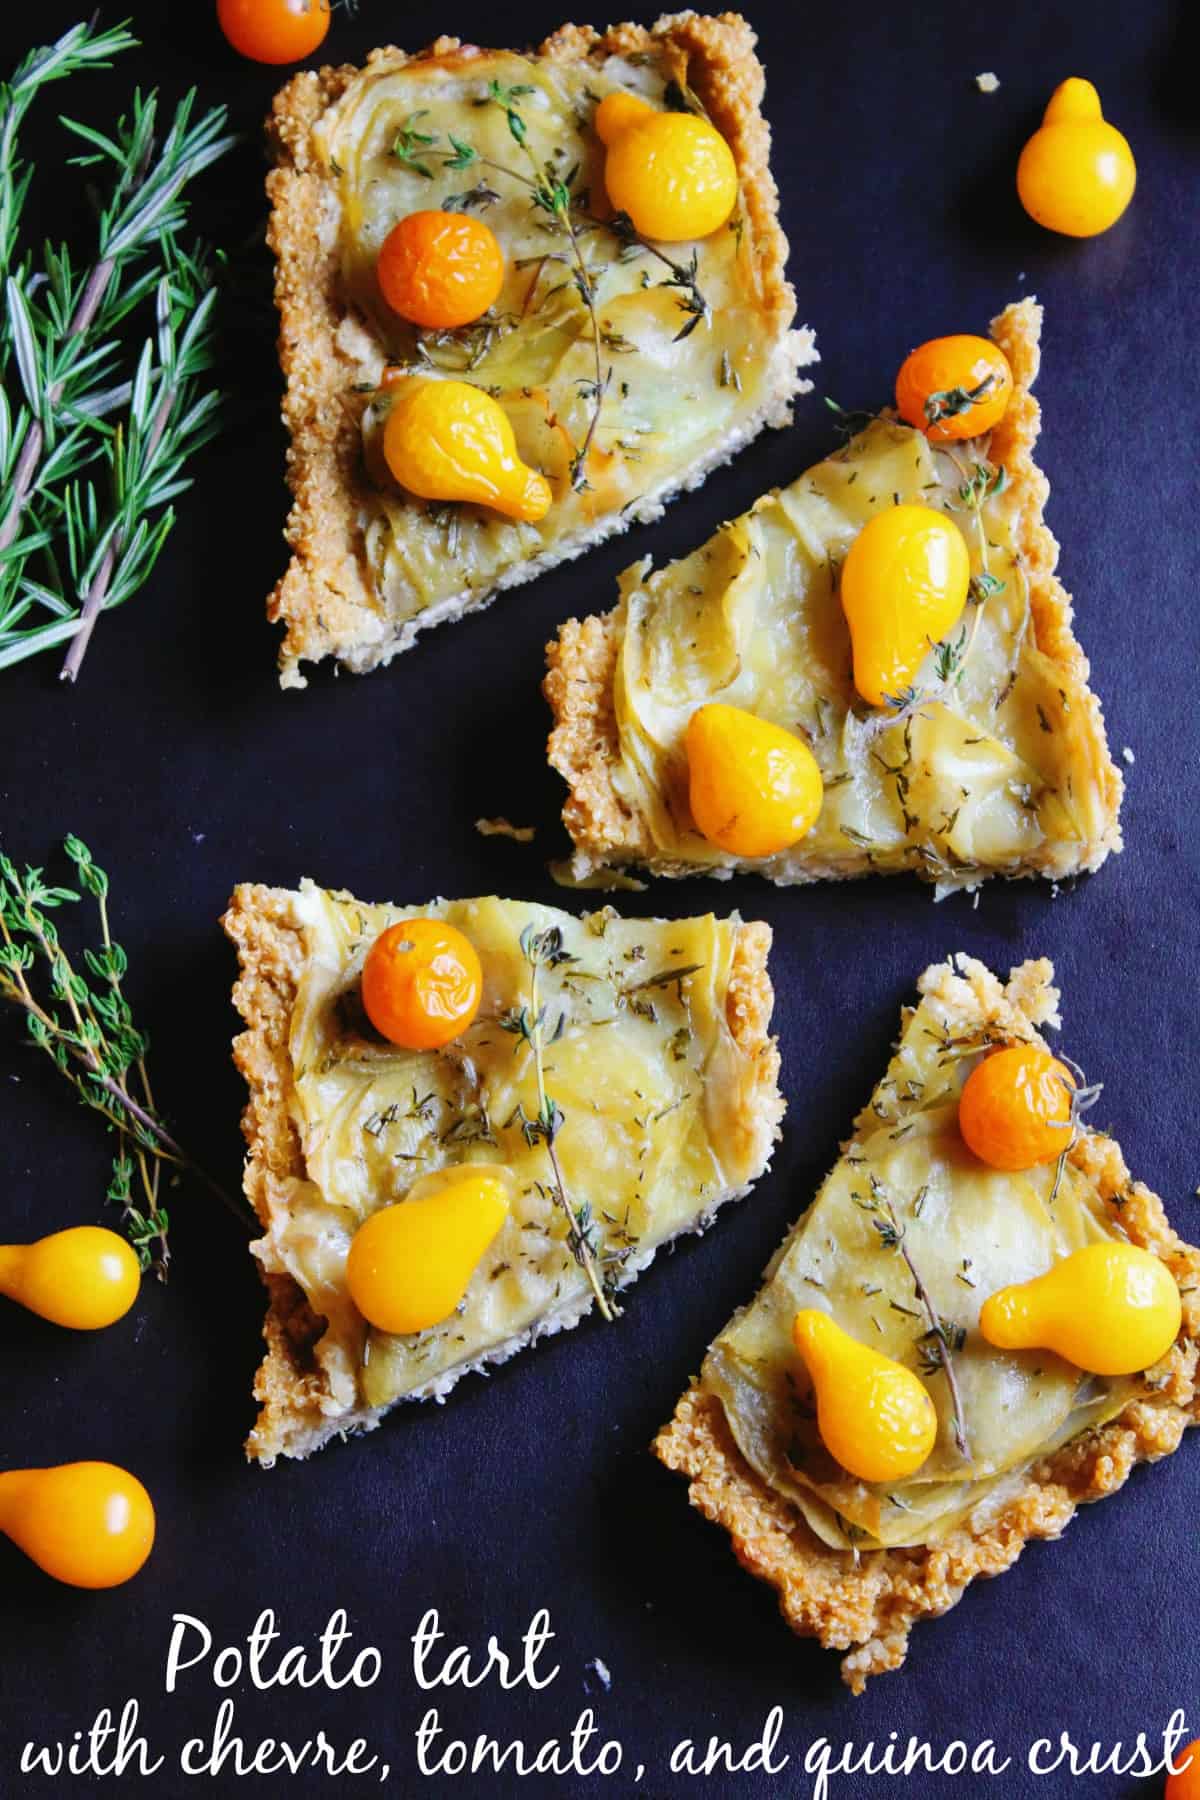 Potato tart with chevre, tomato, and quinoa crust! Delicious gluten free, vegetarian tart with savory goat cheese, thyme, and a crispy, healthy, quinoa crust! YUM!